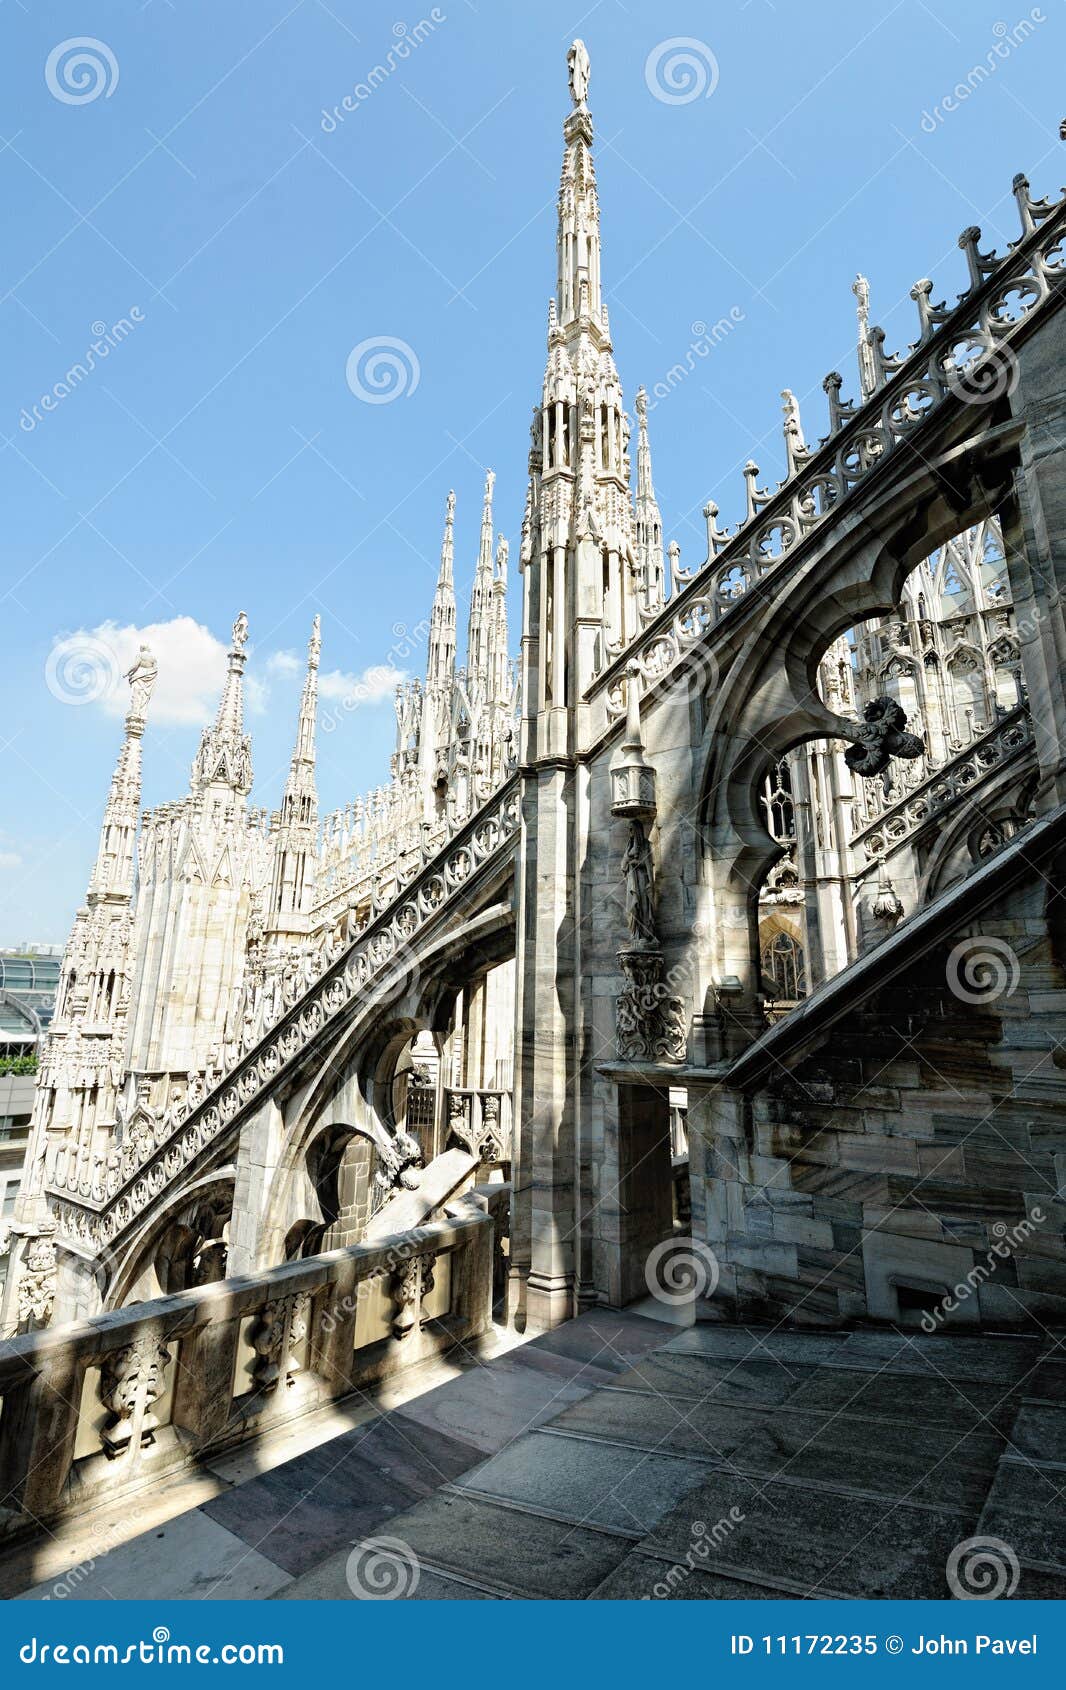 flying buttresss, milan cathedral, lombardy, italy